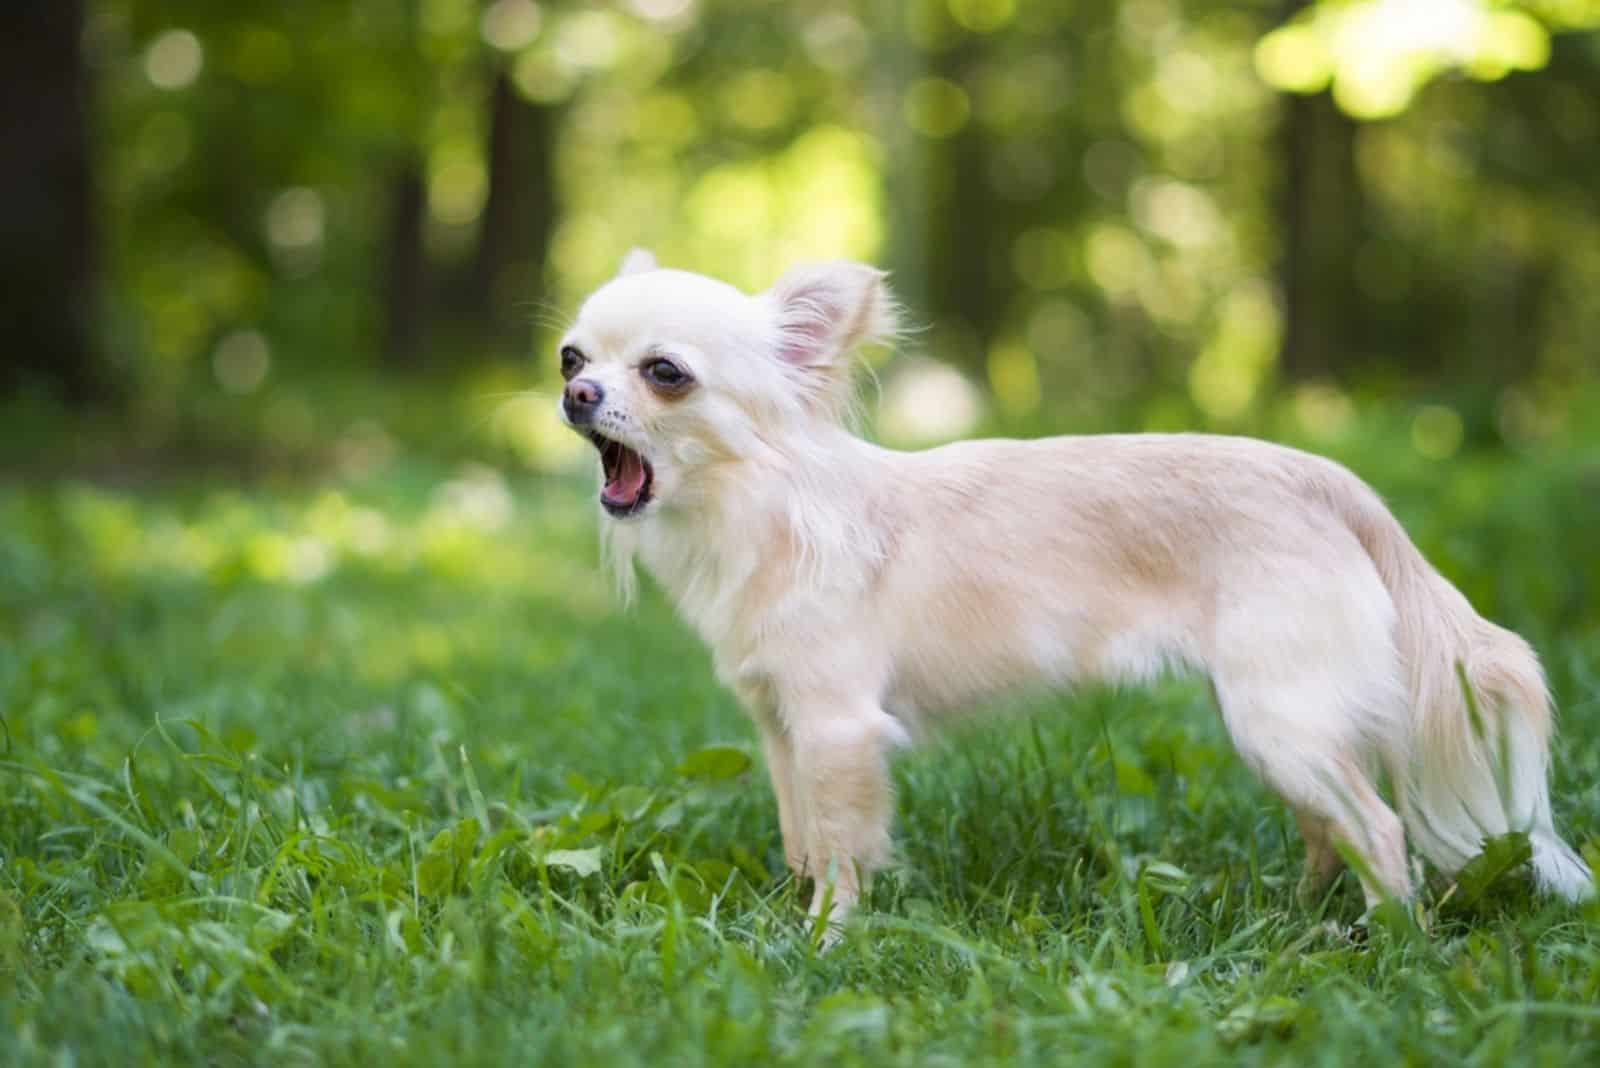 Why Does My Chihuahua Make Weird Noises? 11 Possible Reasons